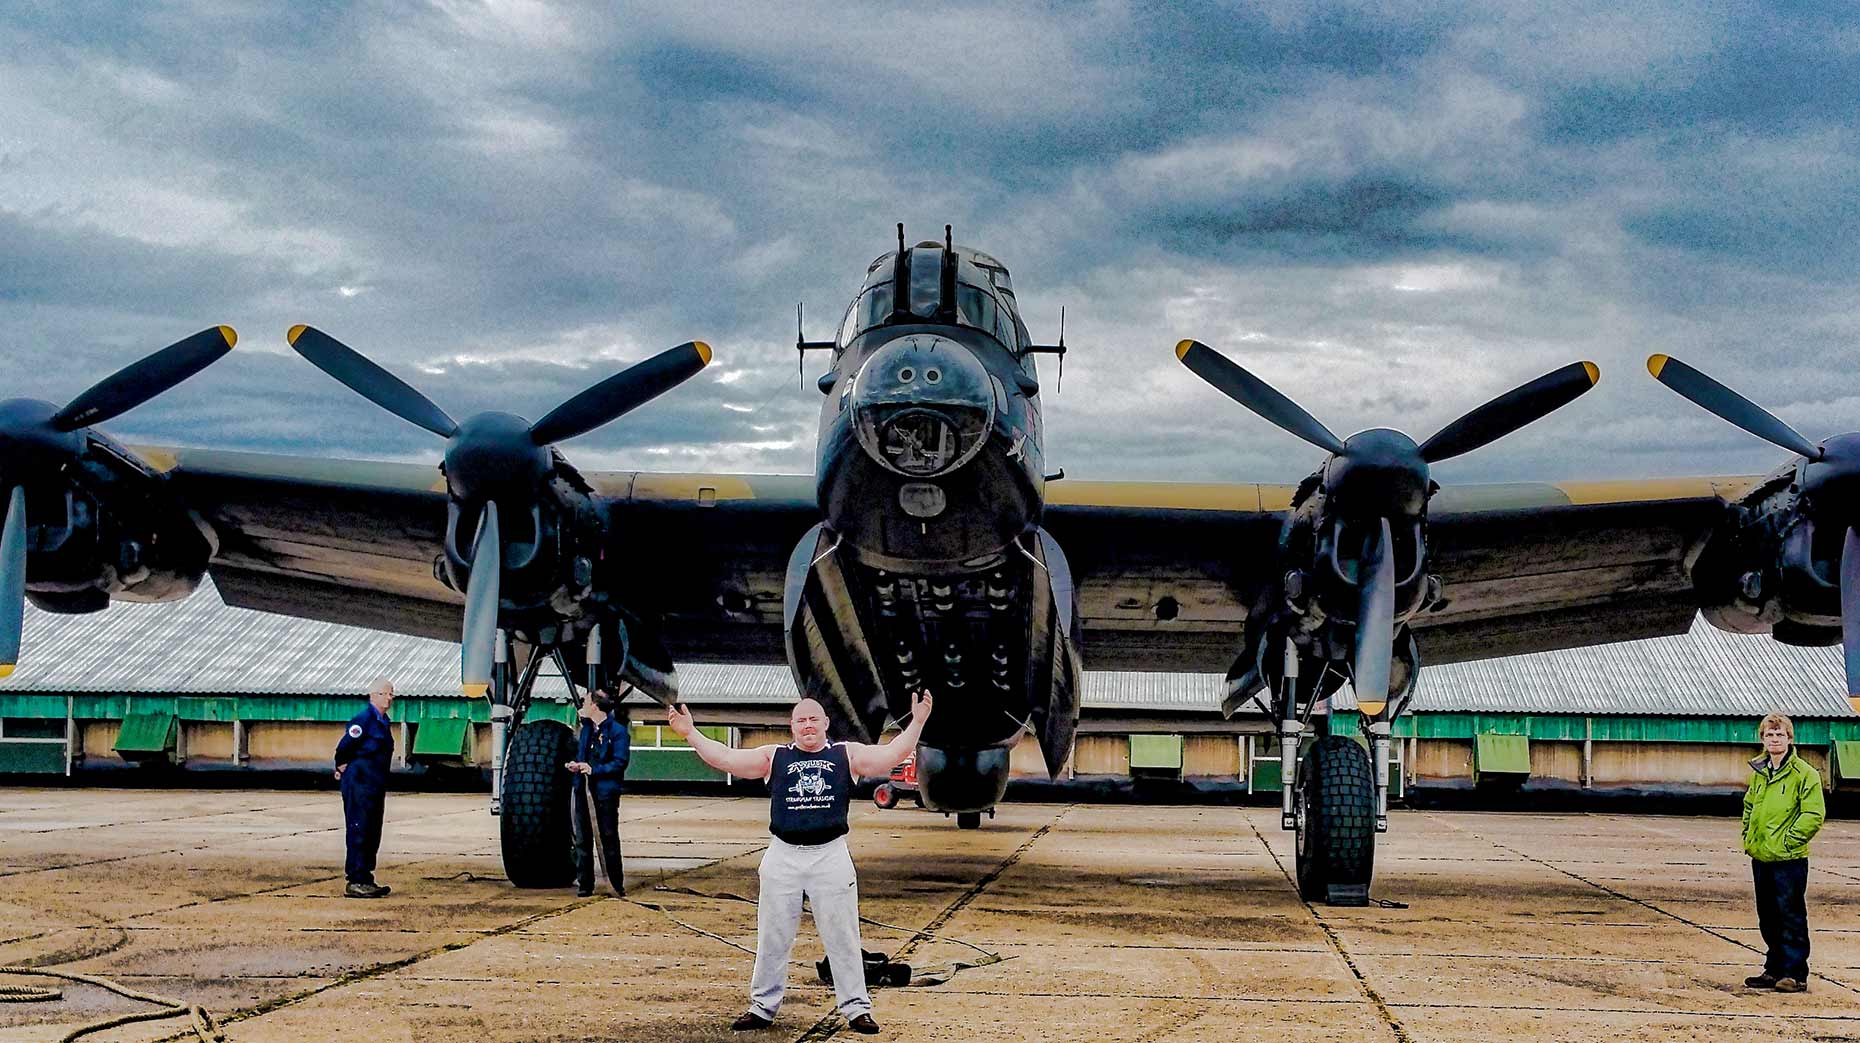 Dave Johnson will pill a Lancaster as part of his next round of charity challenges. 